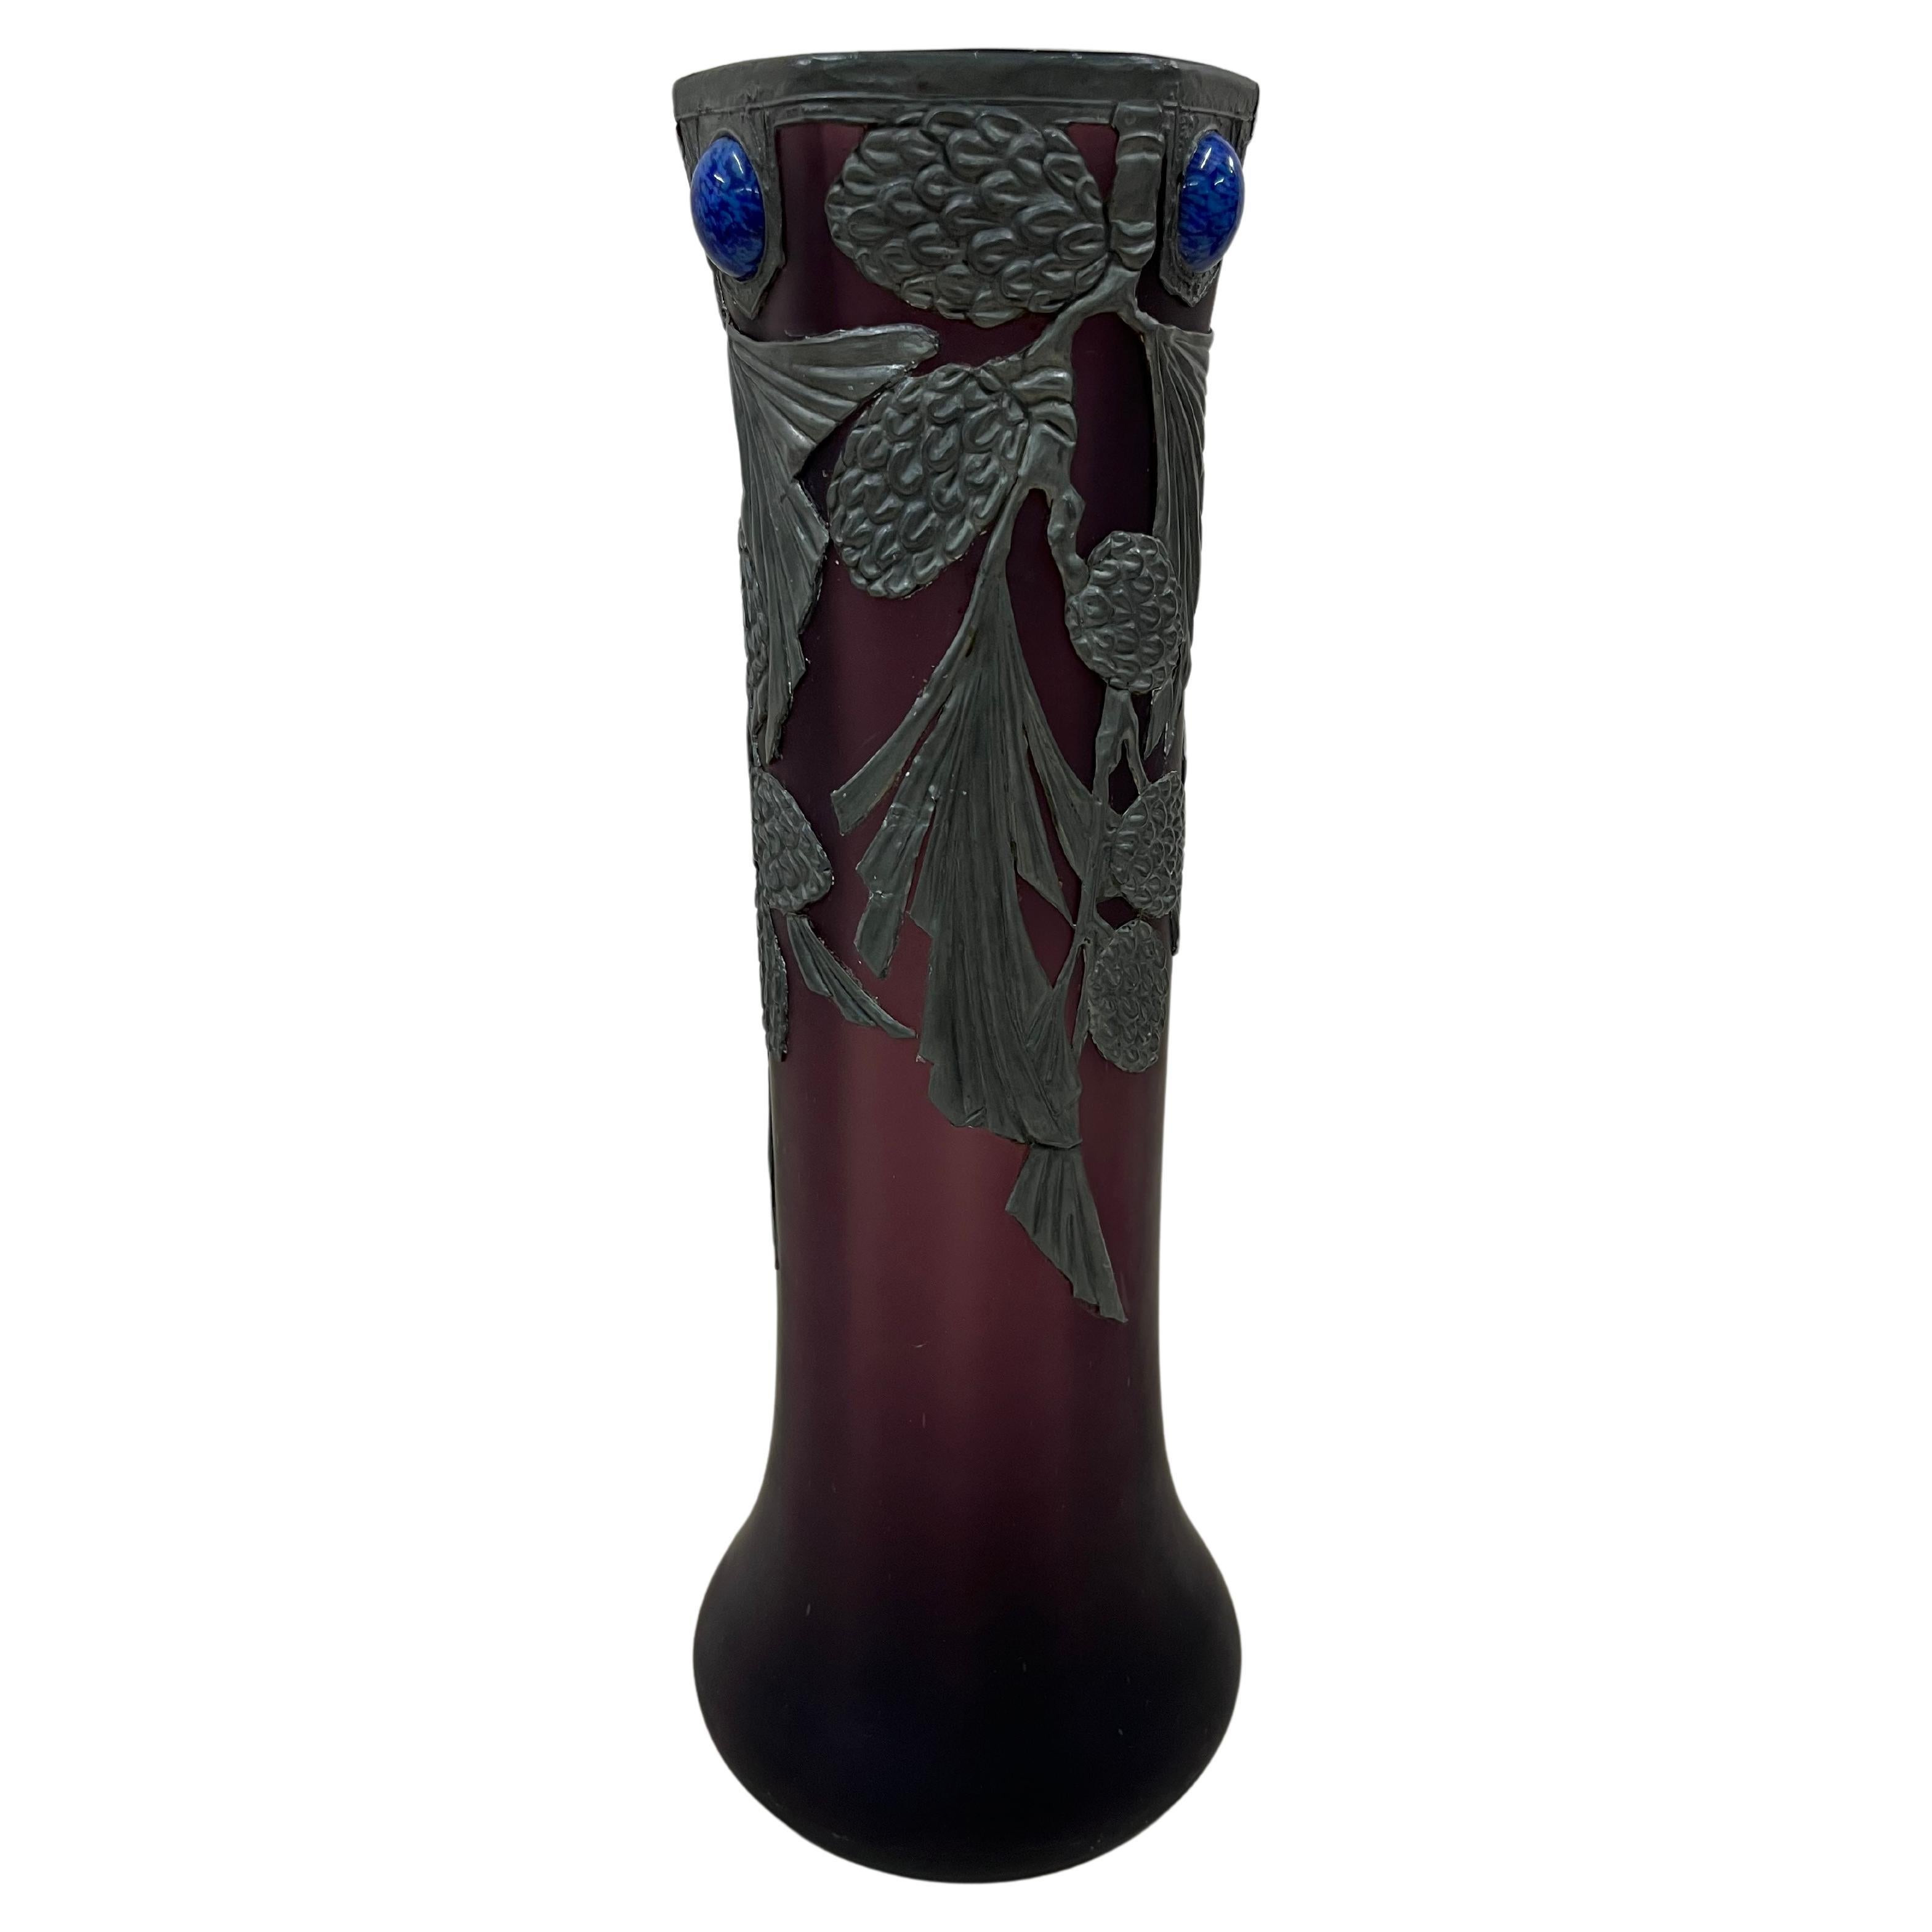 Wonderful dreamy vase, an original from the art nouveau period, made around 1910 in probably France (or Belgium), with floral metal mounting and glass gemstones.

The vase is made of purple glass, with a round base, a thinned body that then ends in